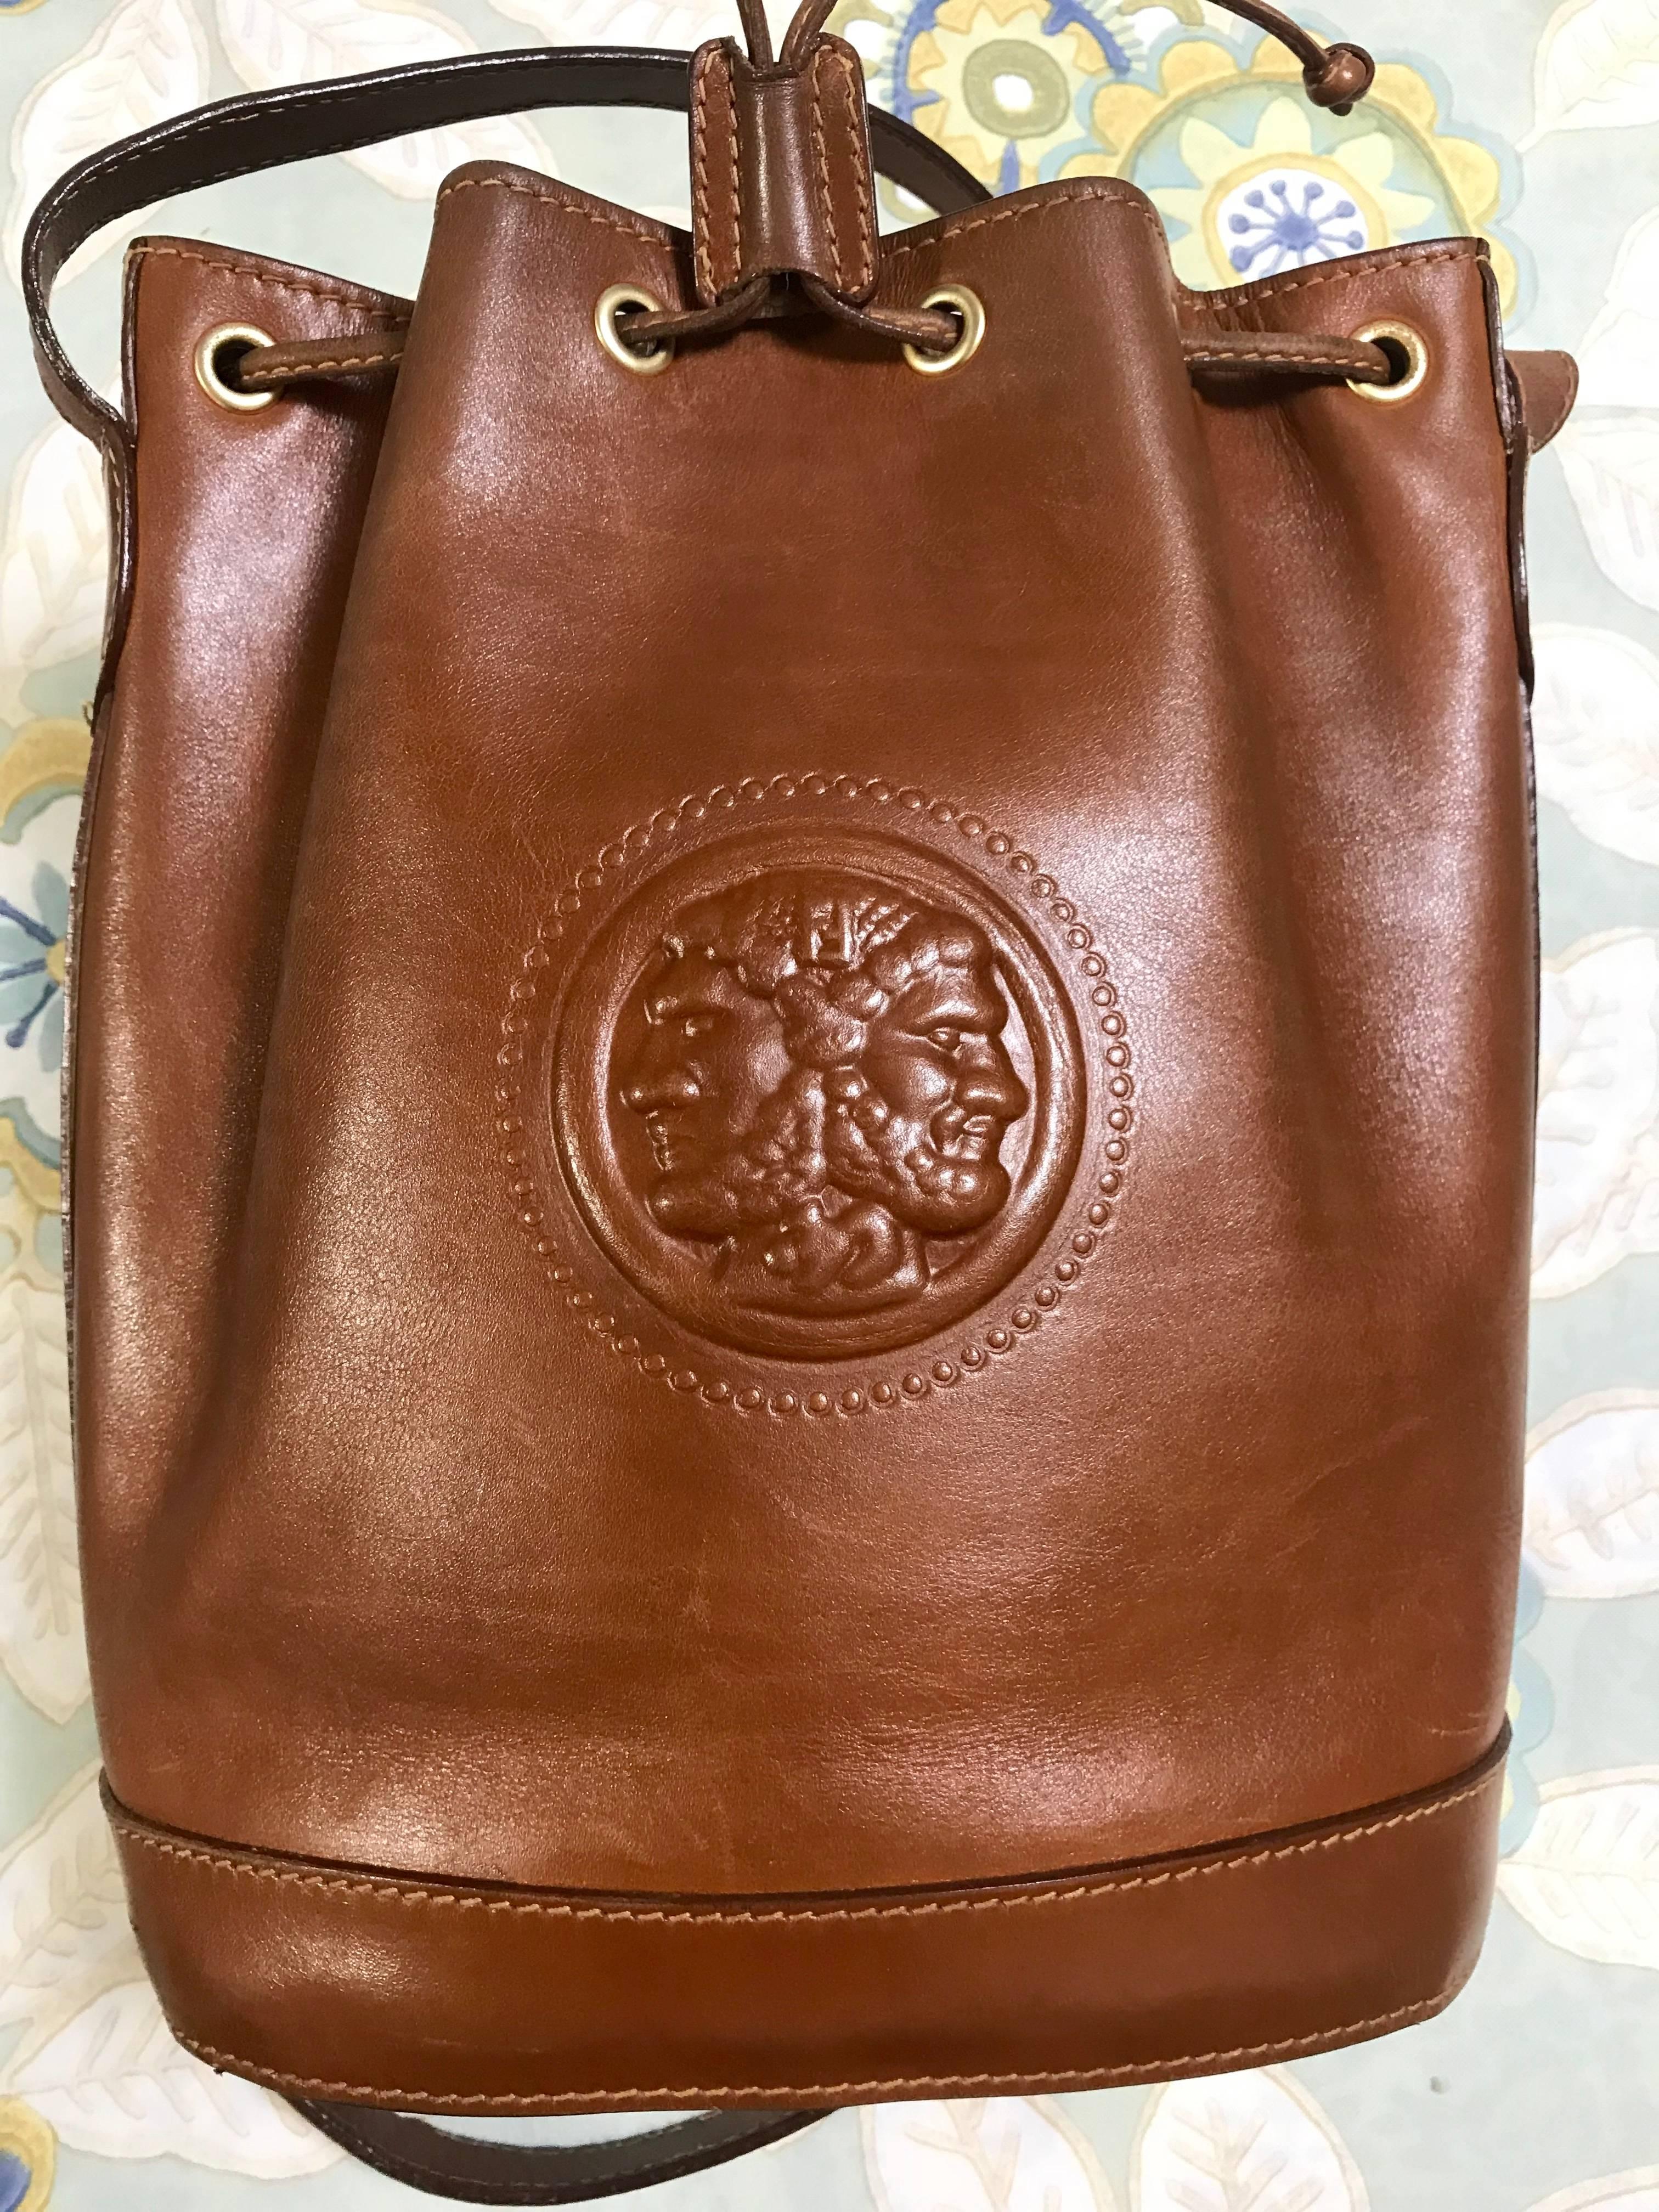 1990s.  Vintage FENDI brown leather hobo bucket, shoulder bag with drawstring and iconic Janus medallion embossed motif at front. Unisex. Rare bag.

If you are a FENDI vintage collector and lover, then this one will be your must-have piece.

This is